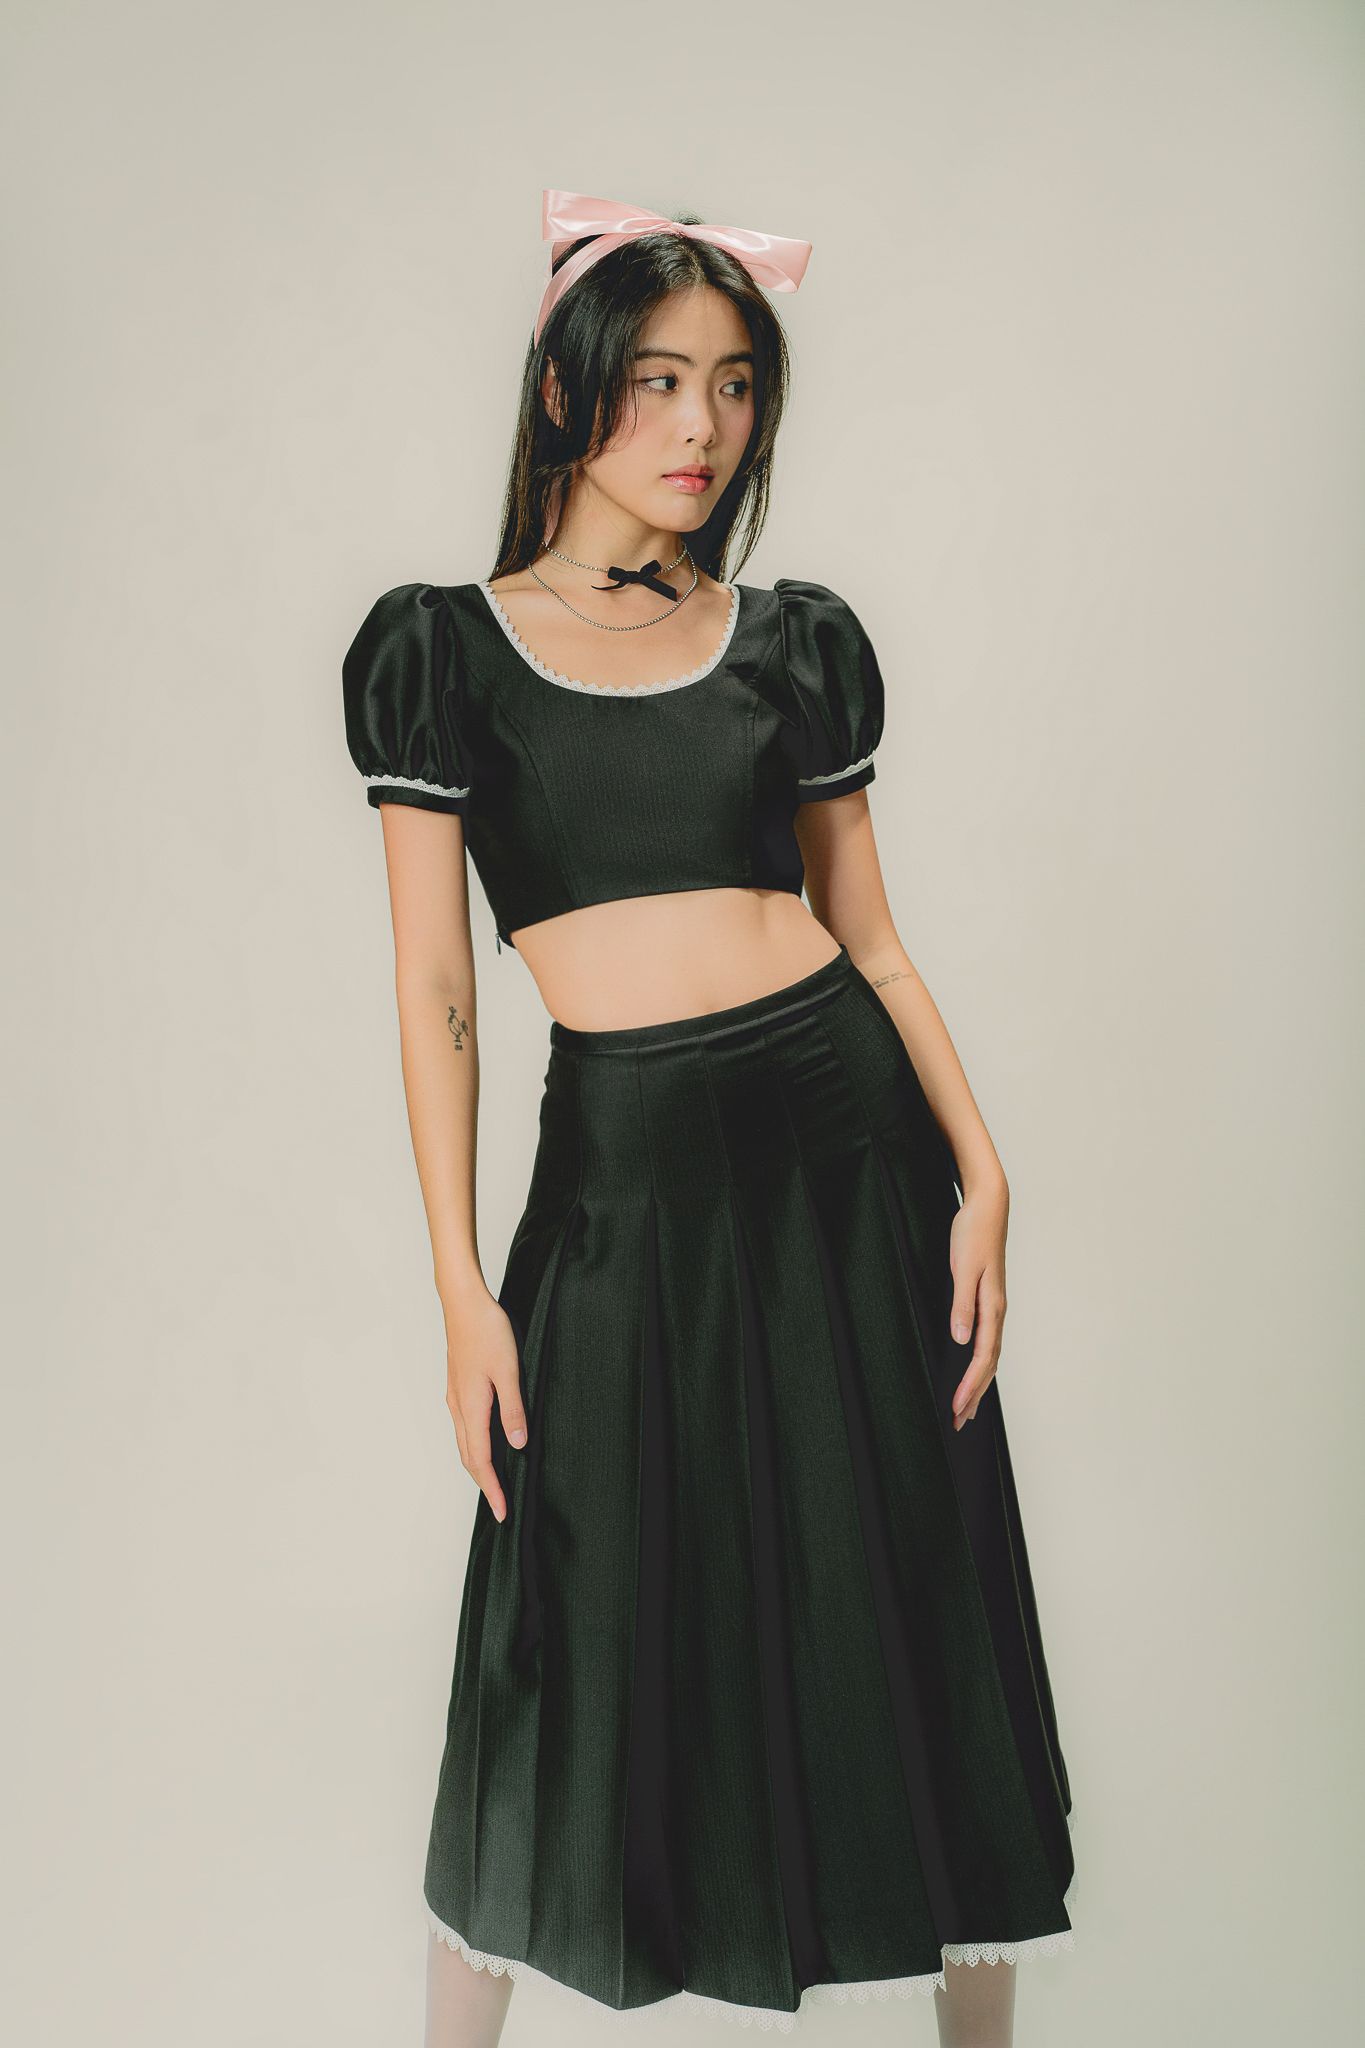  Black Puff Sleeve Crop Top With Lace Trim 